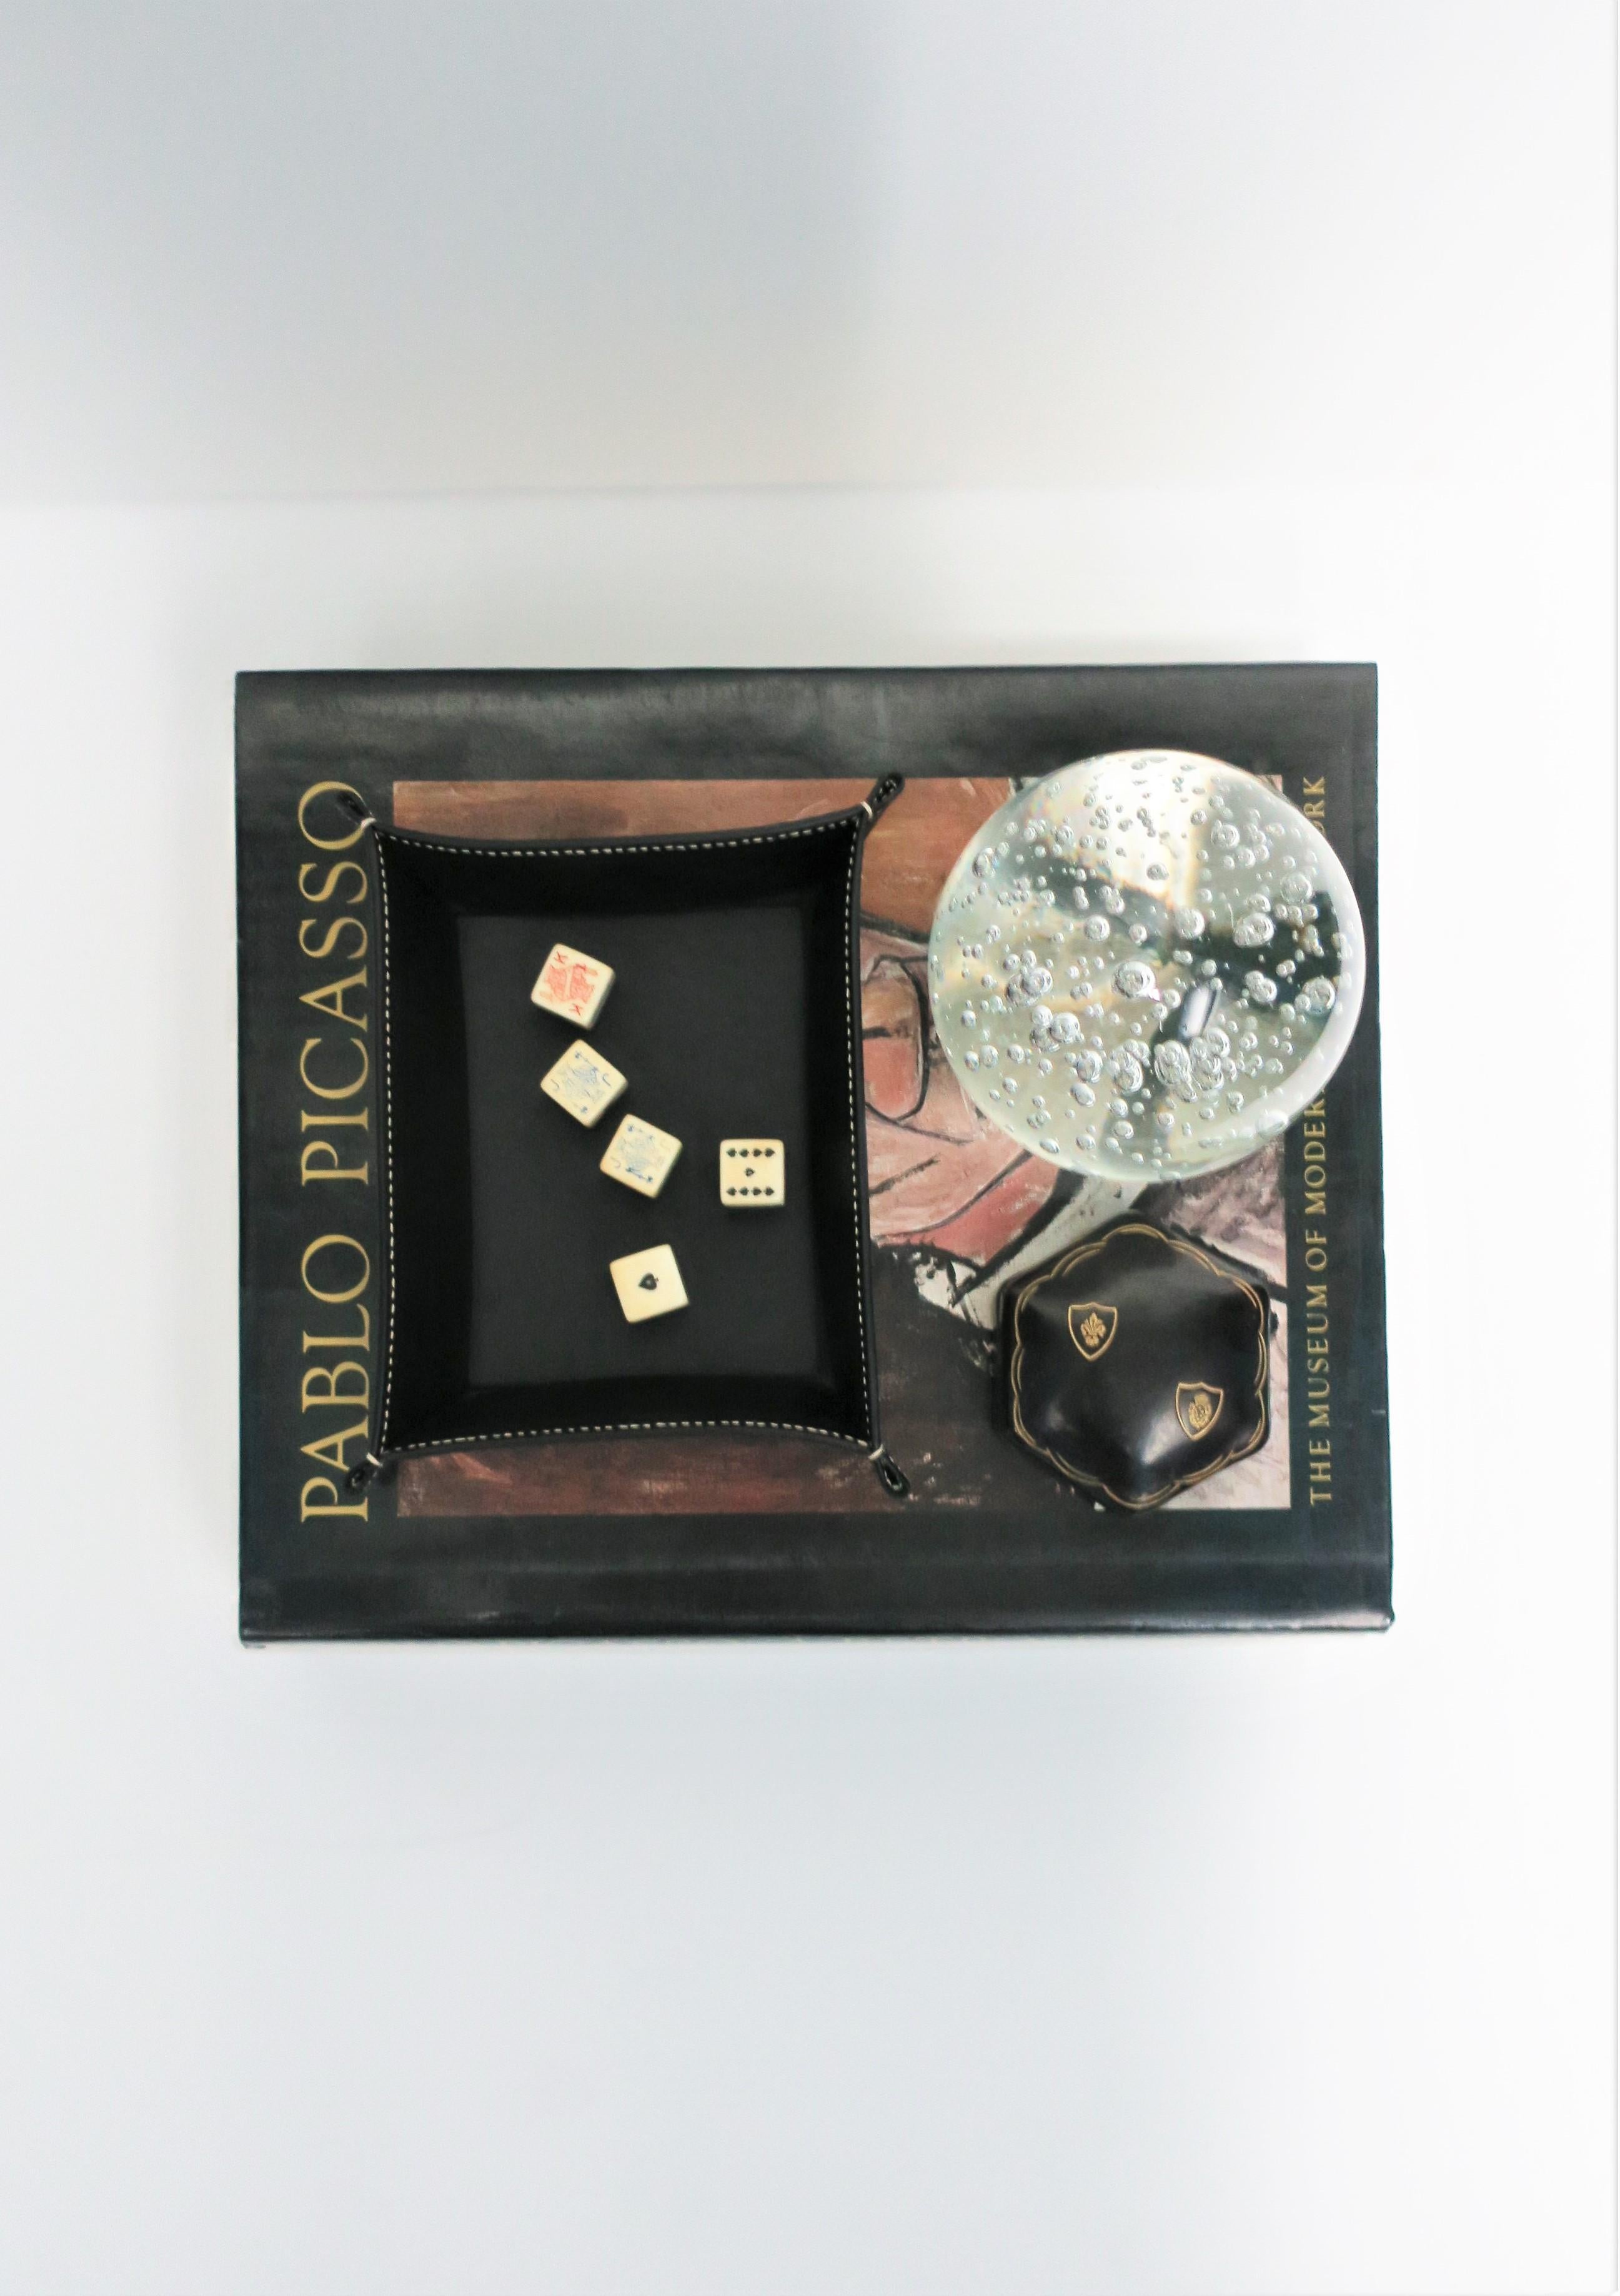 Vintage poker dice set (5), circa 20th century. 

Other items shown in images also available search 1stDibs ref. #:
Picasso Book 1980s, search ref. #: LU1314221961672
Italian black leather catch-all, #: LU1314221975932
Small octagonal box, #: